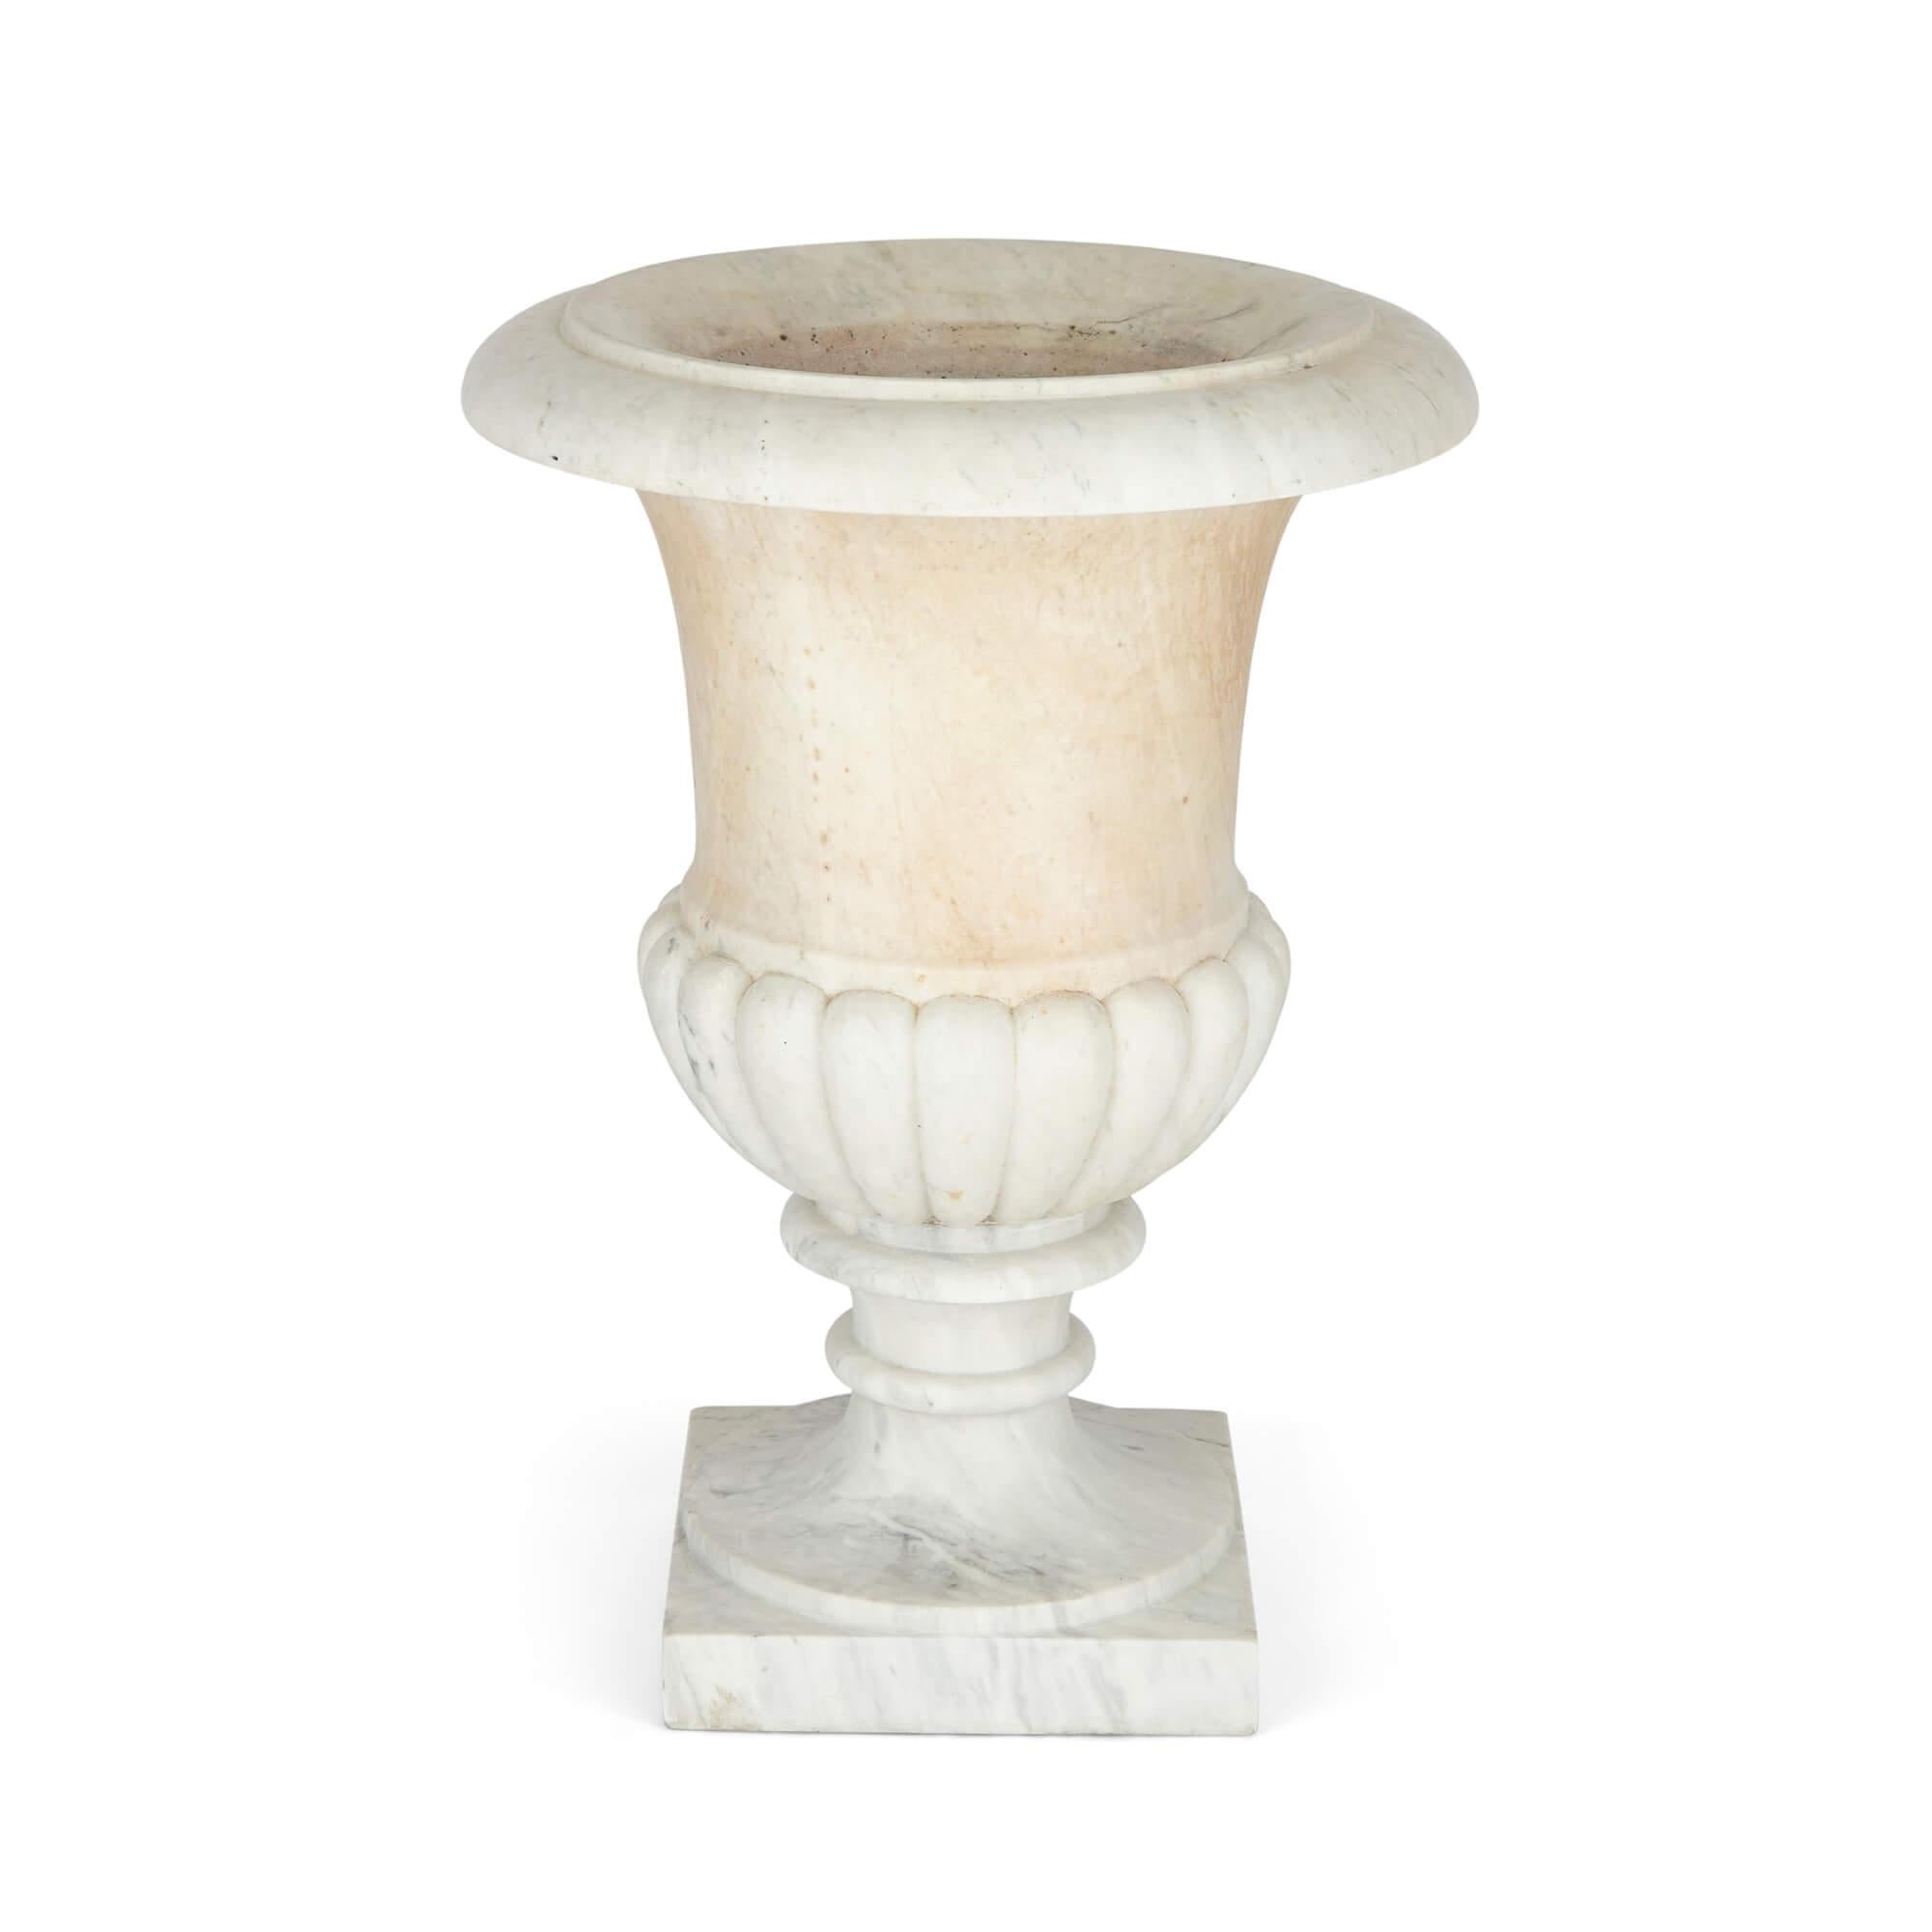 Large carved white marble campagna-form garden urn
Continental, 19th century
Measures: height 60cm, diameter 42cm

Crafted from white marble, this fine garden urn is carved in the familiar campagna form of that of the well-known Medici vase to